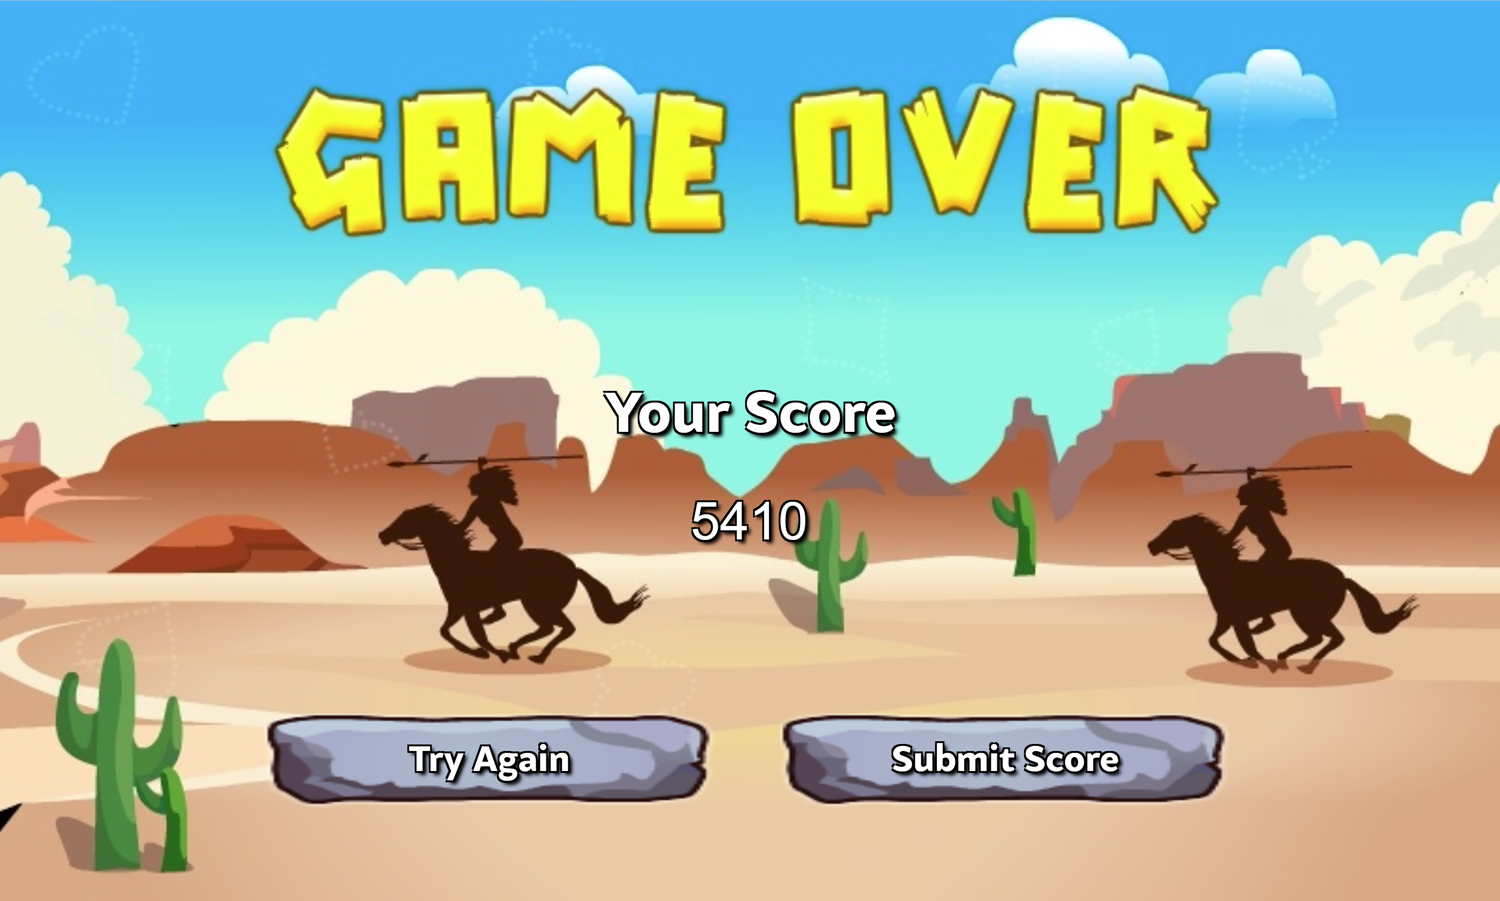 Indian Solitaire Game Over Screen Screenshot.